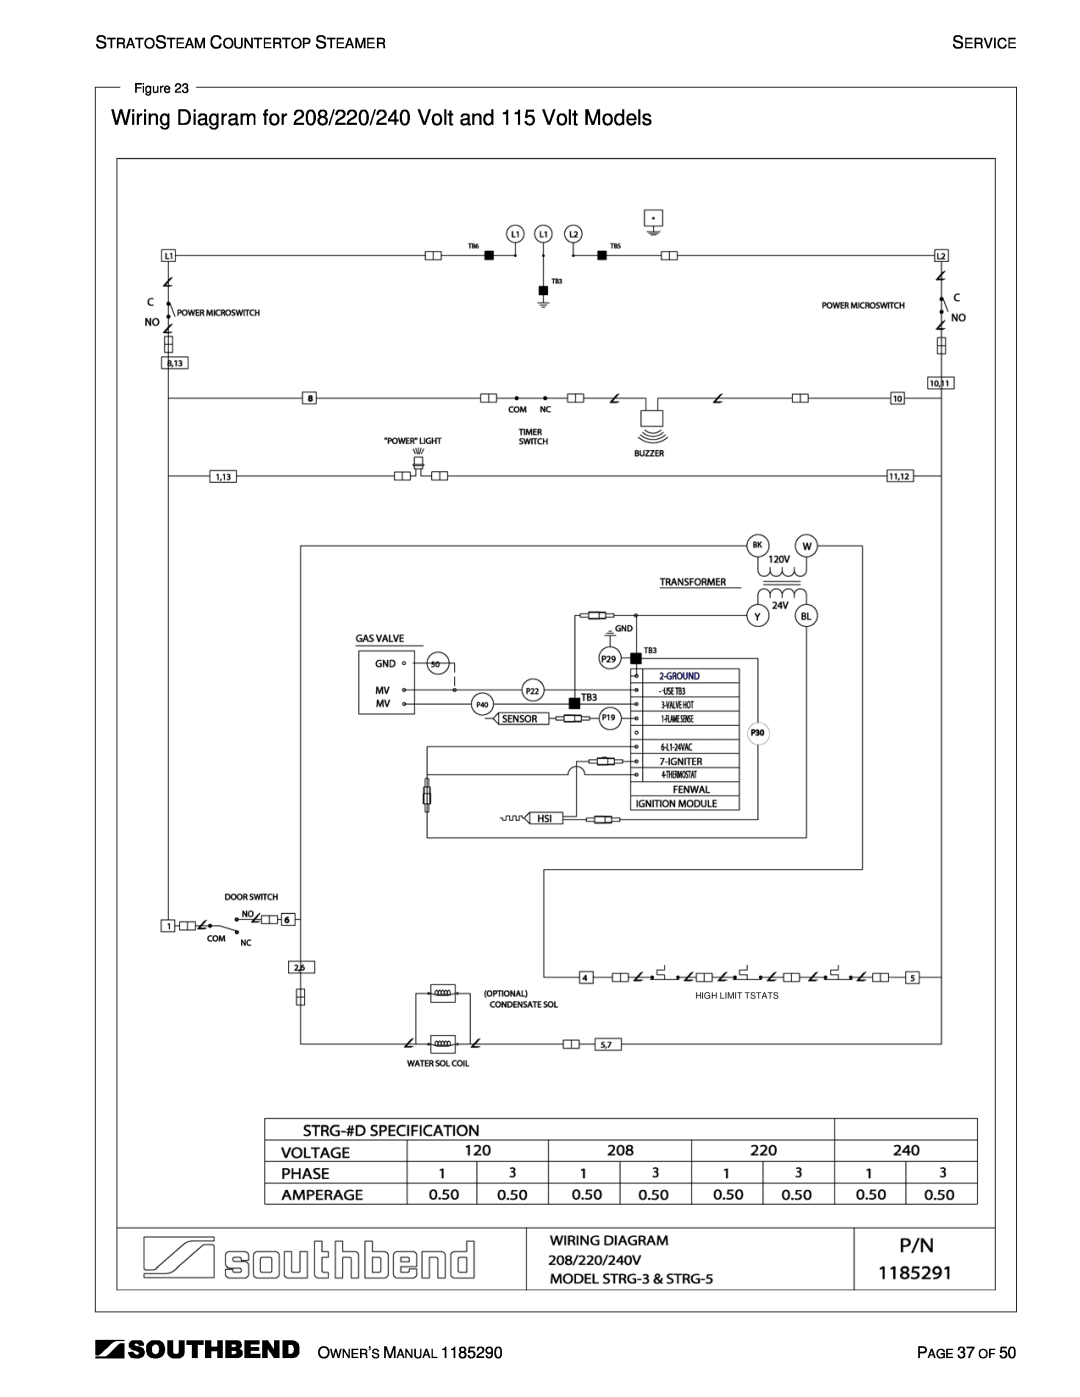 Southbend STRG-3D, STRG-5D manual Wiring Diagram for 208/220/240 Volt and 115 Volt Models, PAGE 37 OF, High Limit Tstats 